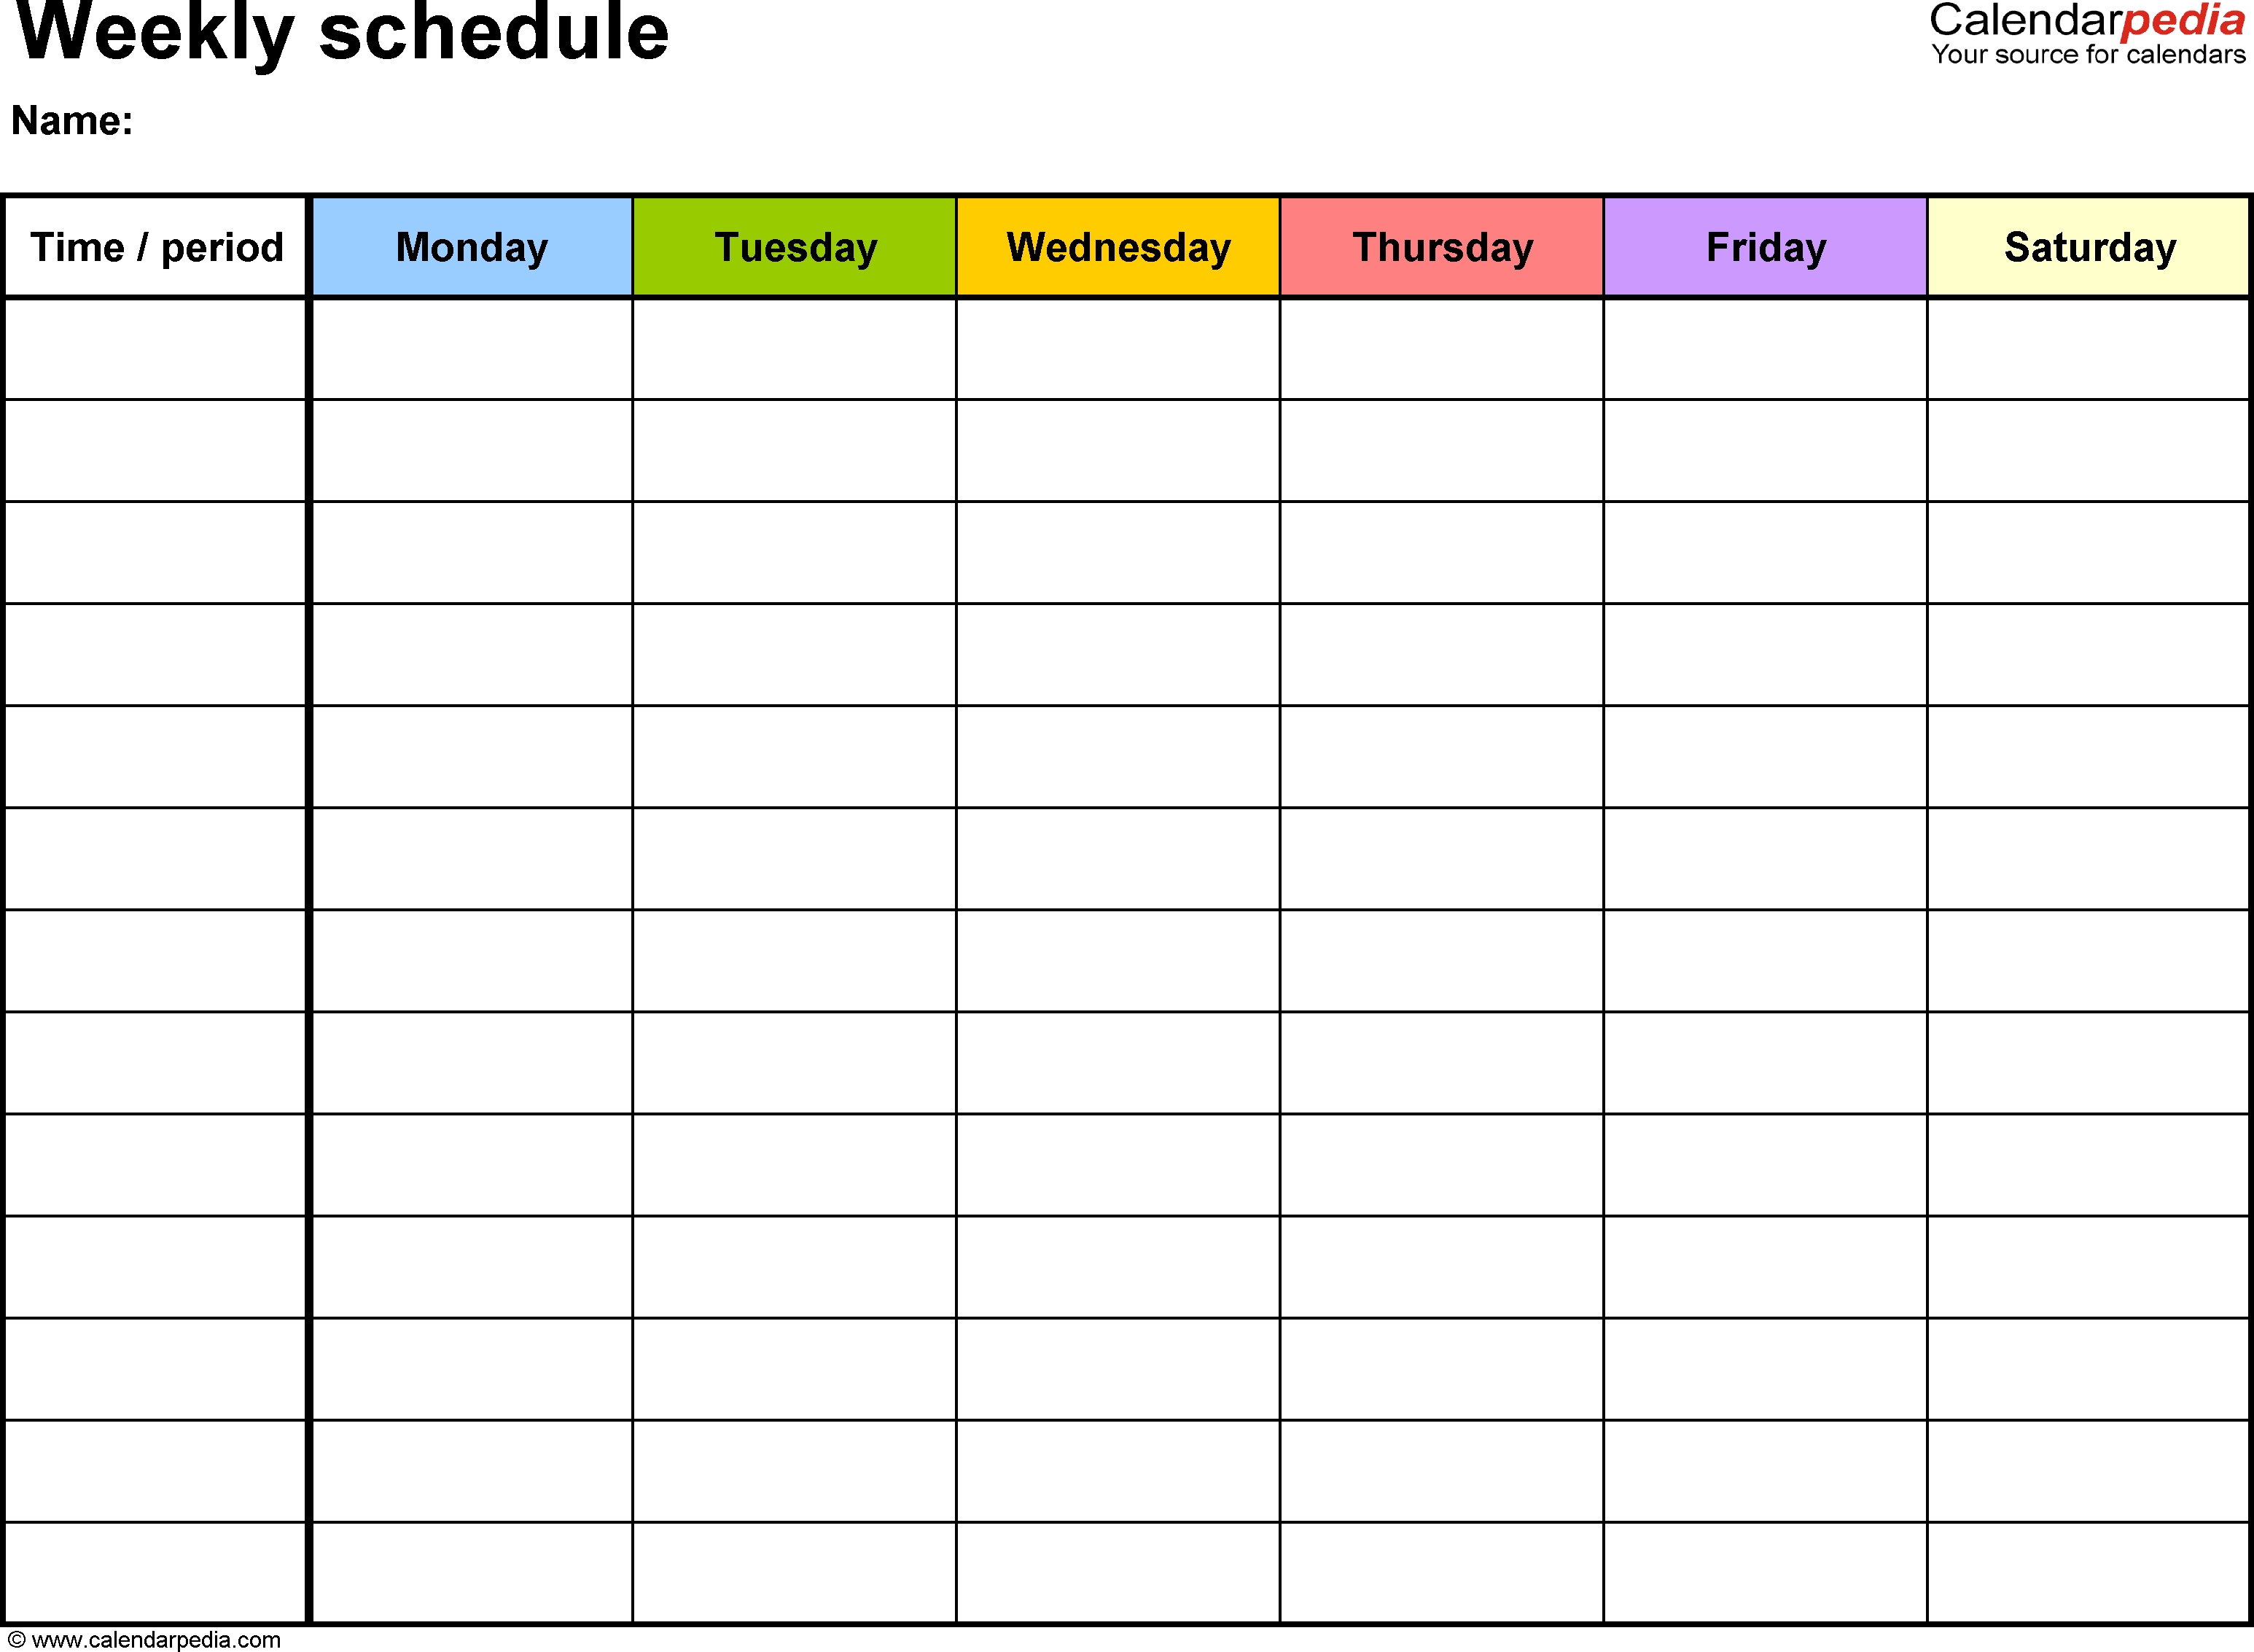 Free Weekly Schedule Templates For Word - 18 Templates  Monday Through Friday Calendar Template